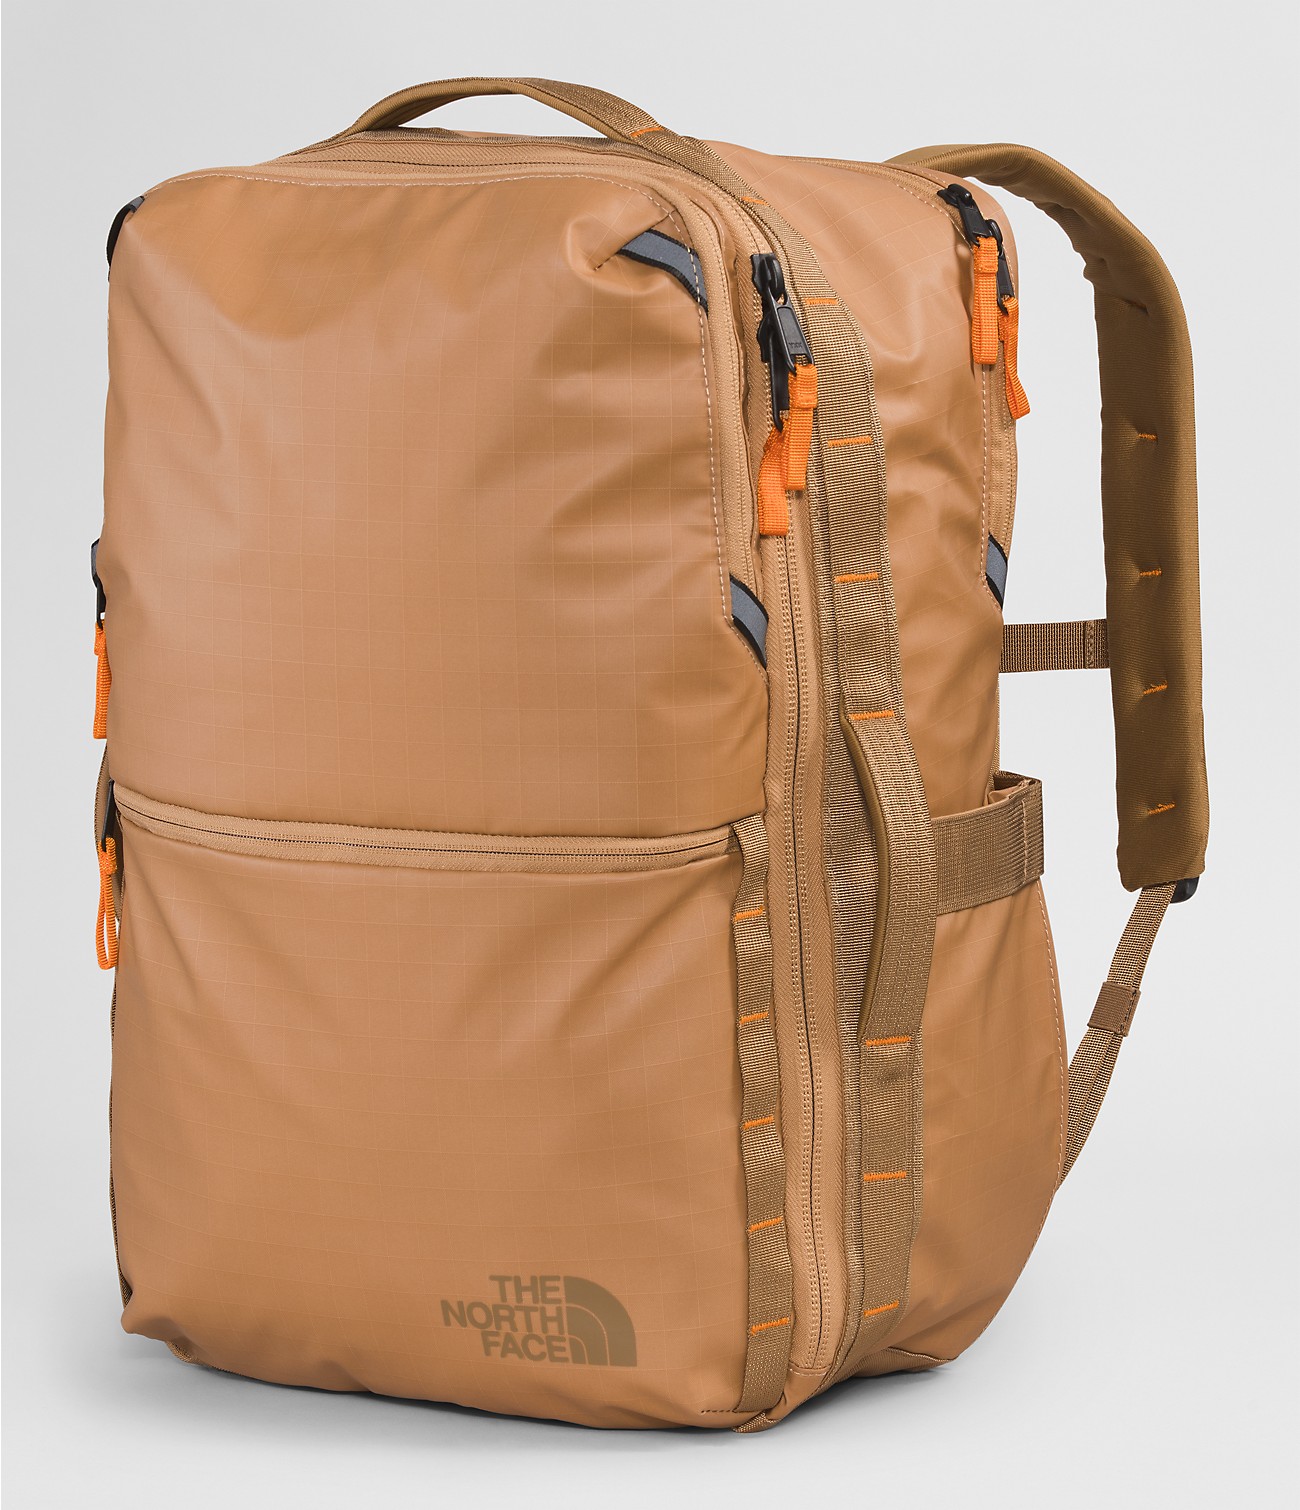 Unlock Wilderness' choice in the Cotopaxi Vs North Face comparison, the Base Camp Voyager Travel Pack by The North Face